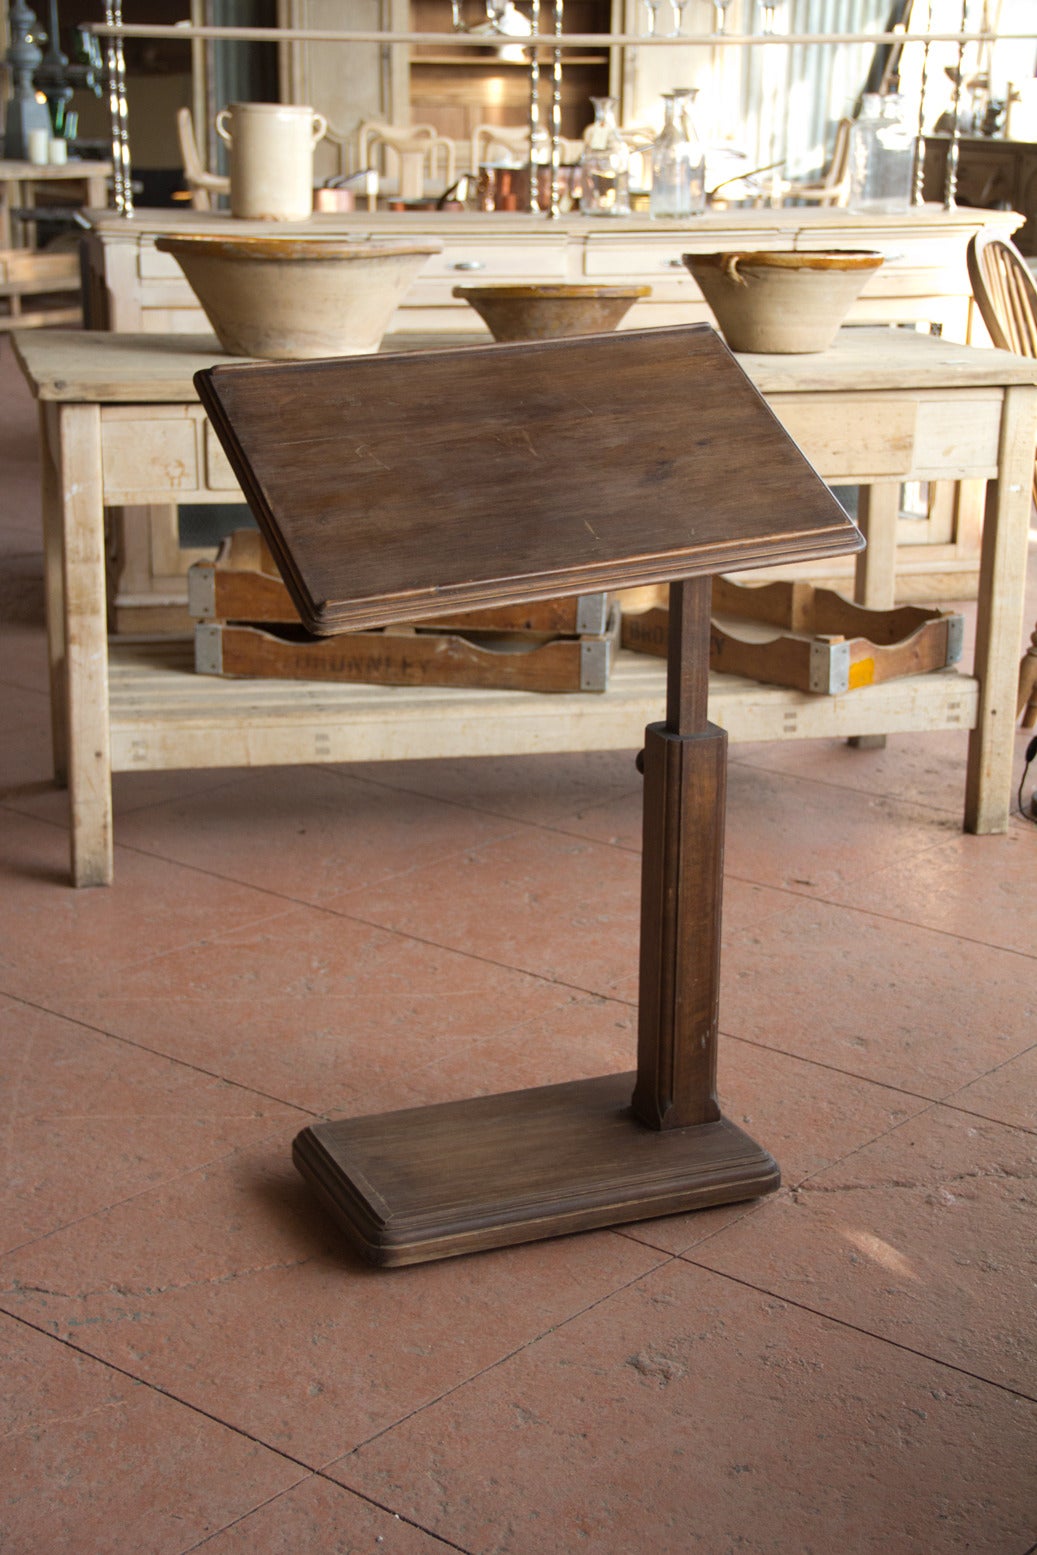 Antique lectern on wheels with its original hardware.